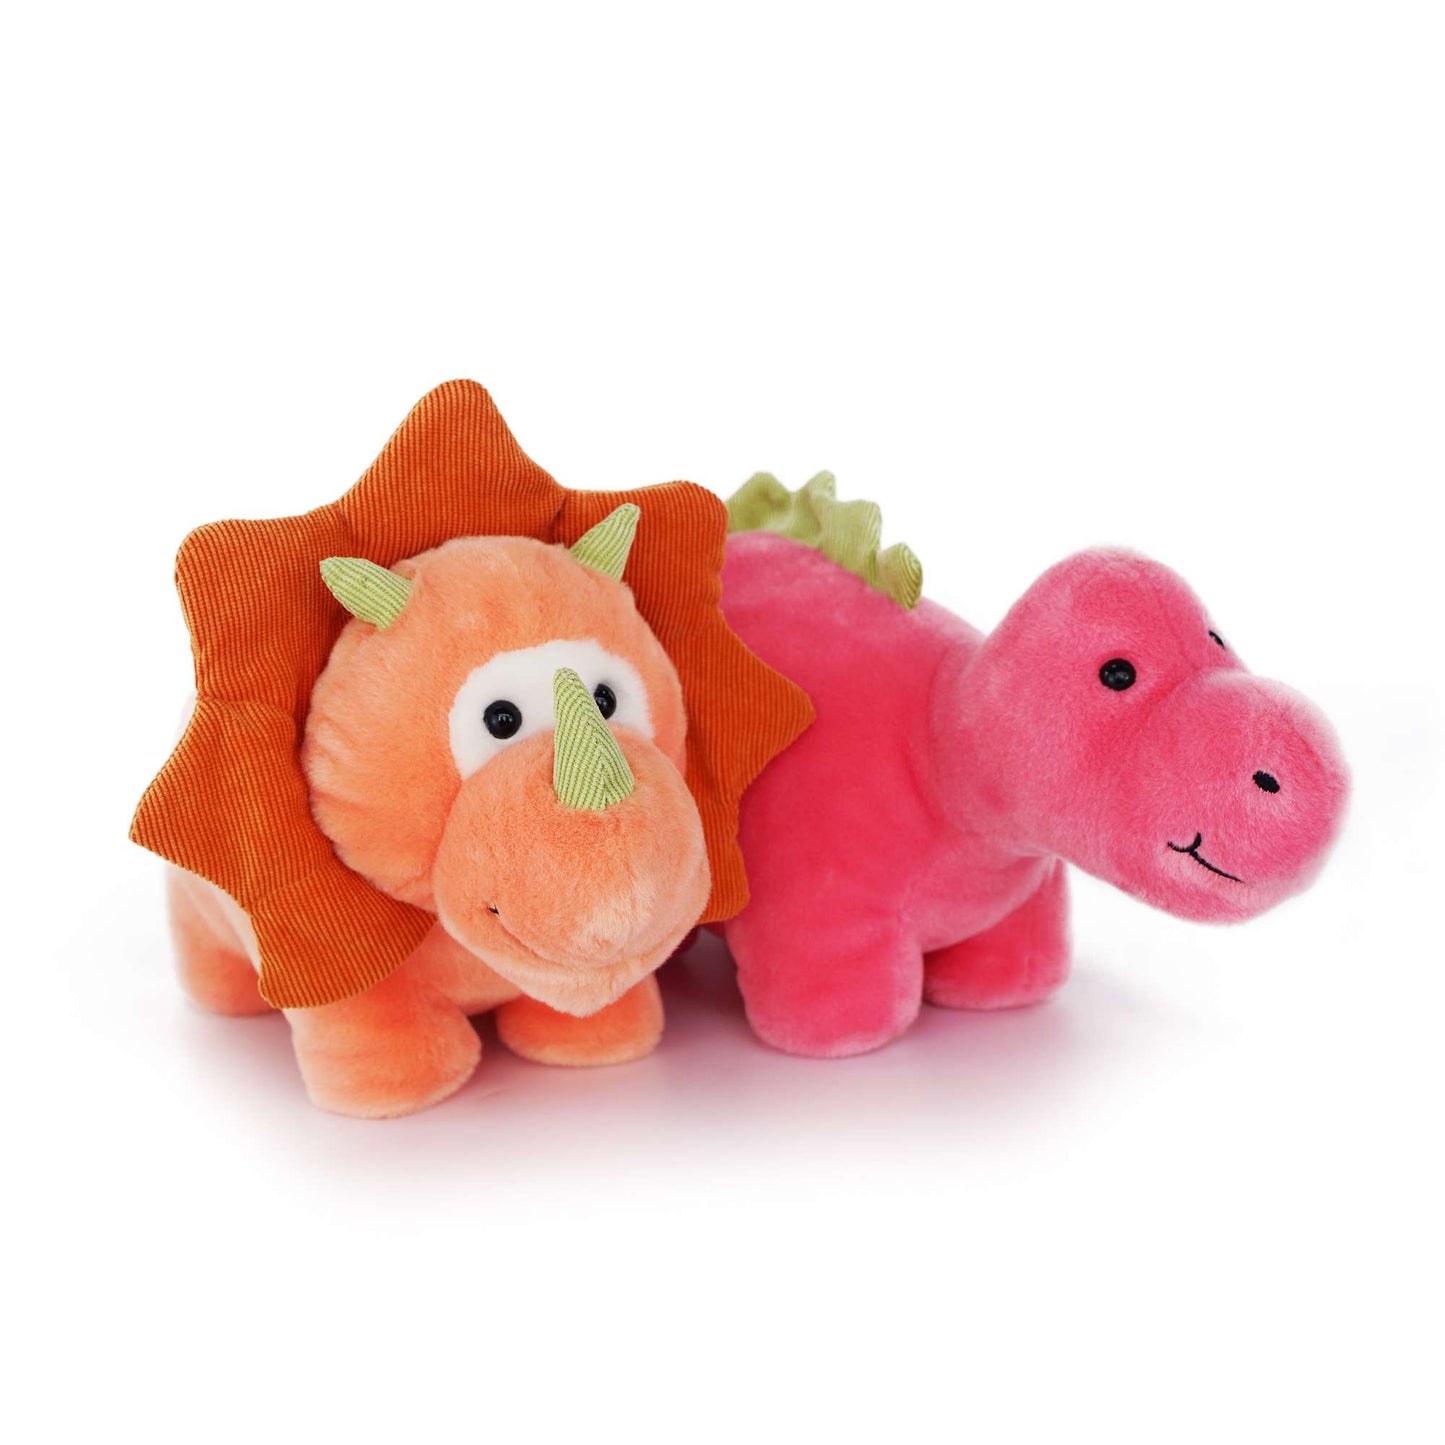 Triceratops and herbivore friends stuffed animal PlushThis